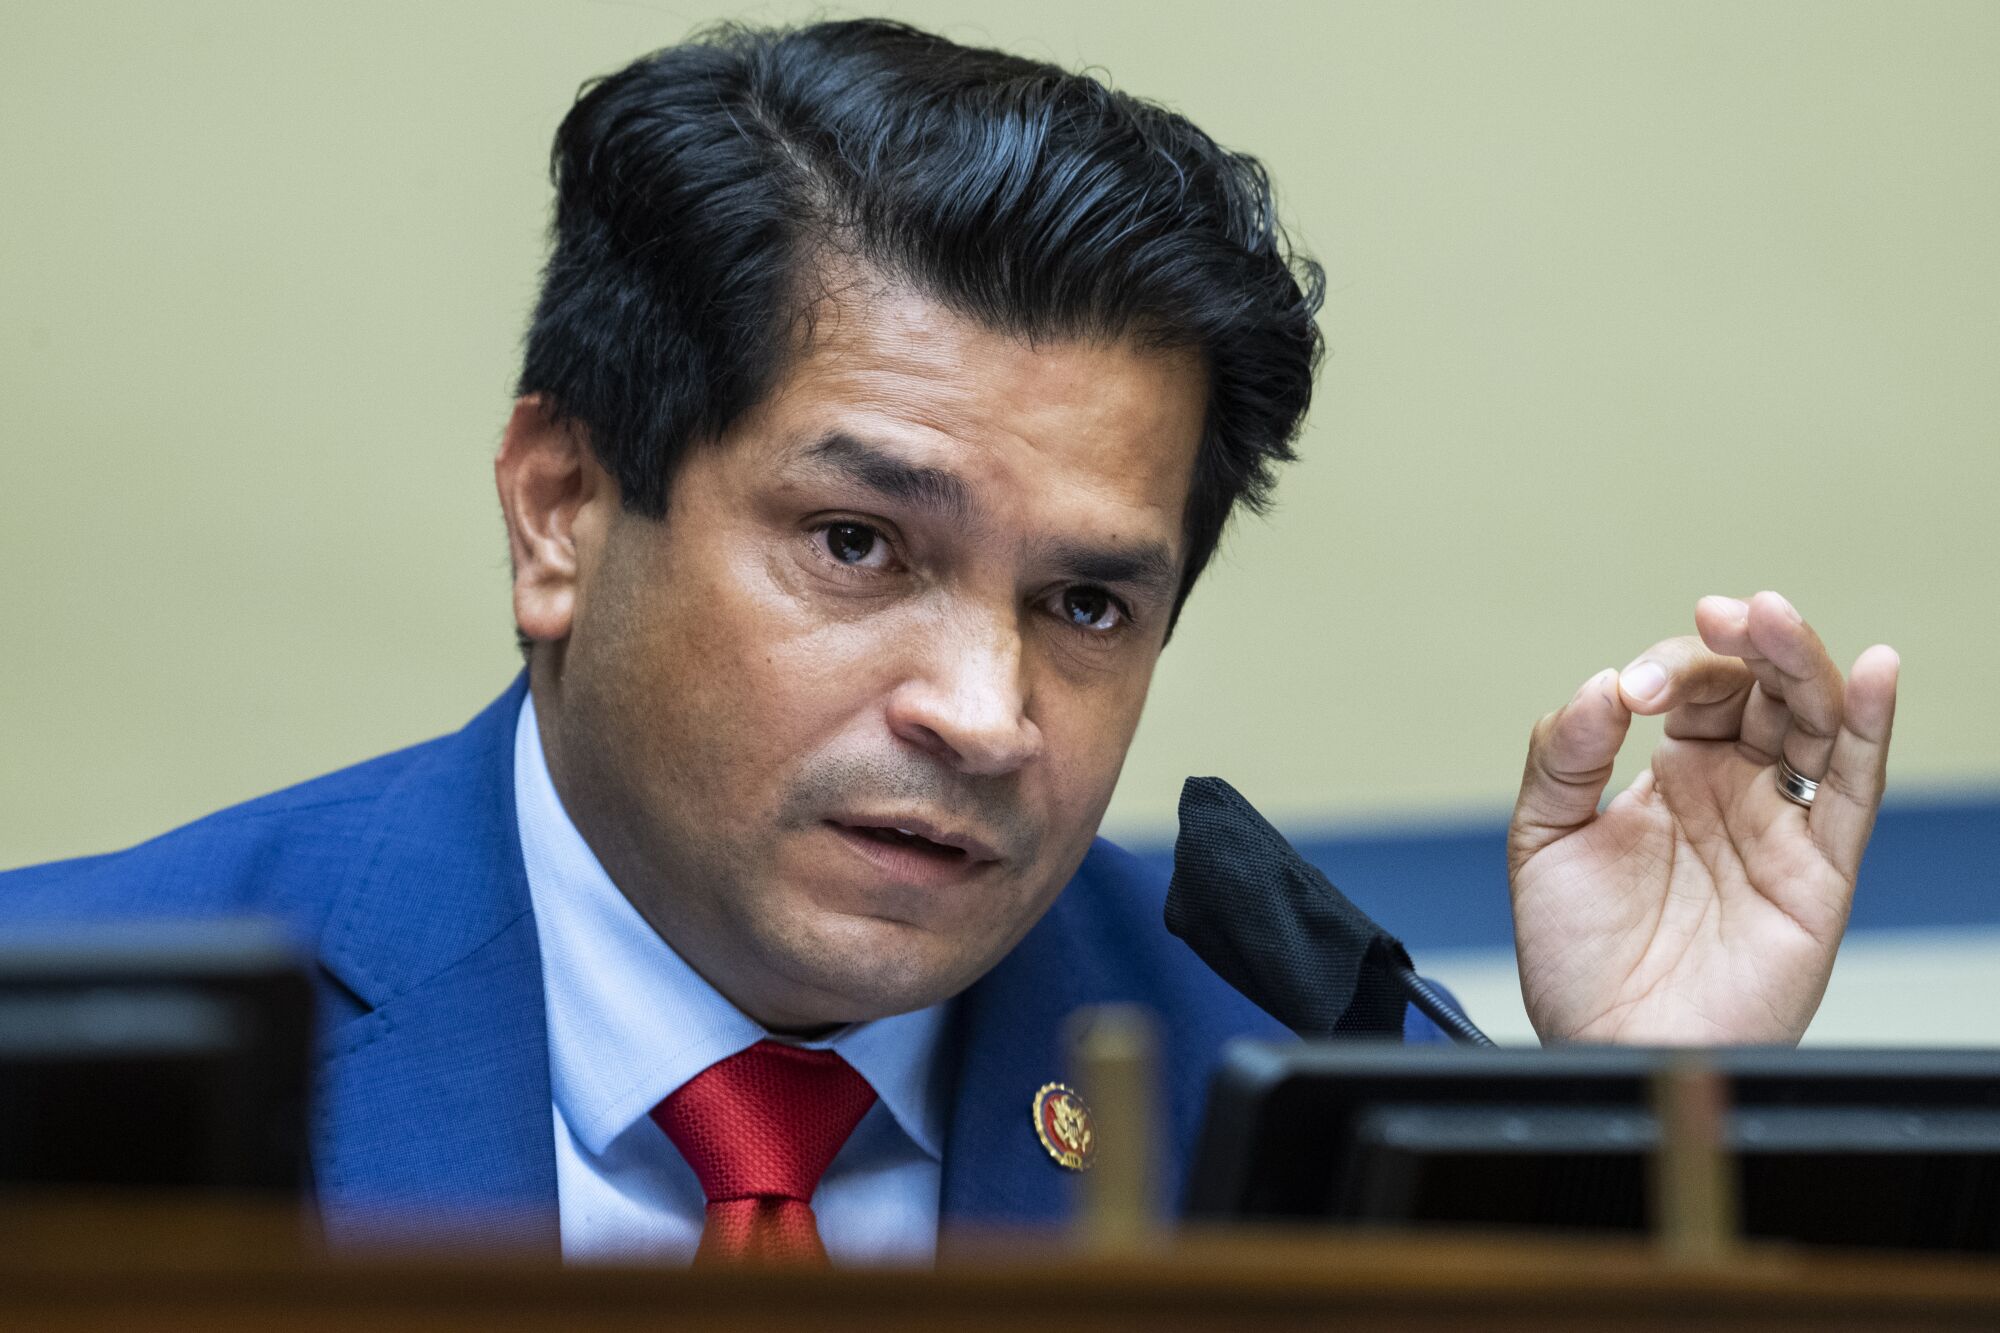 Rep. Jimmy Gomez questions a witness during a House committee hearing